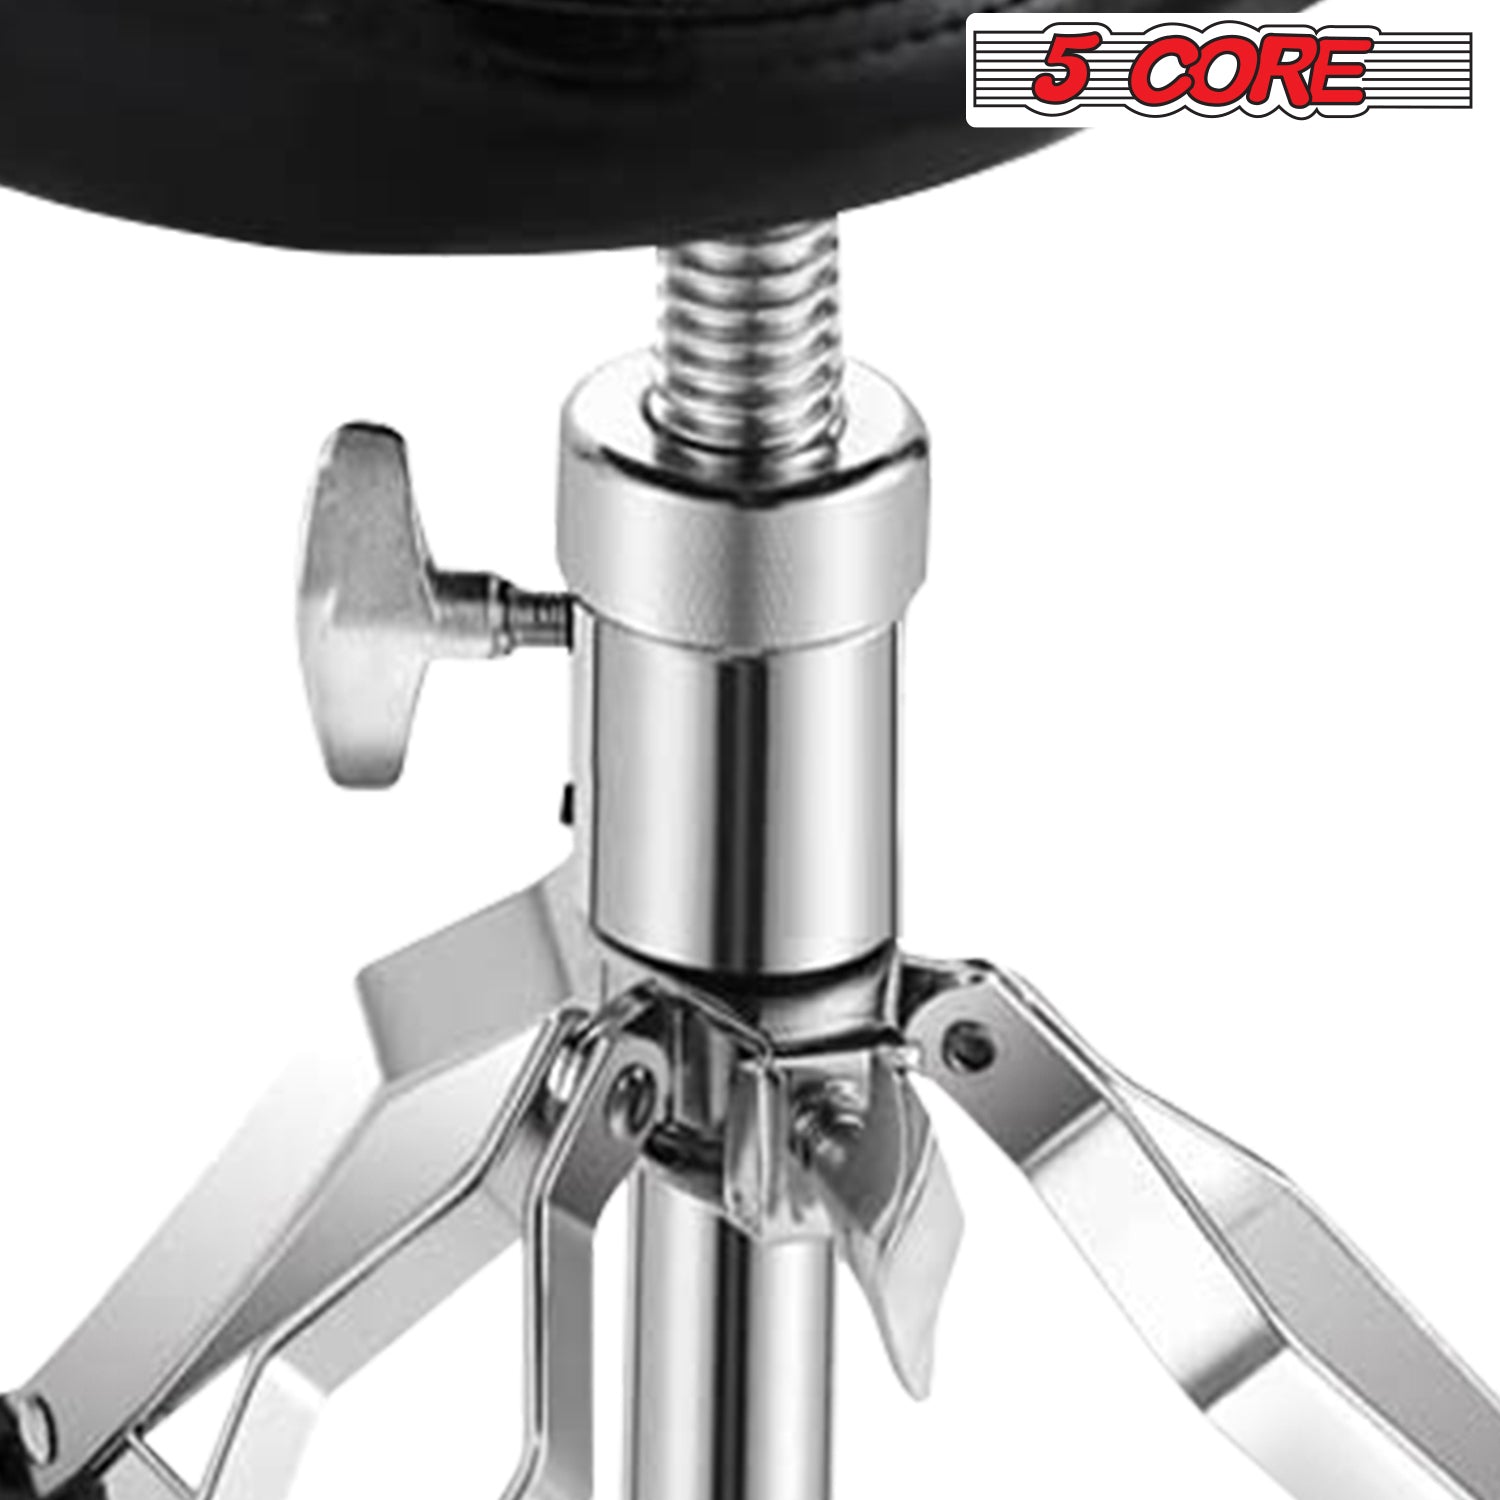 5 Core Drumming Stool: Height adjustable padded seat for drummers and percussionists.